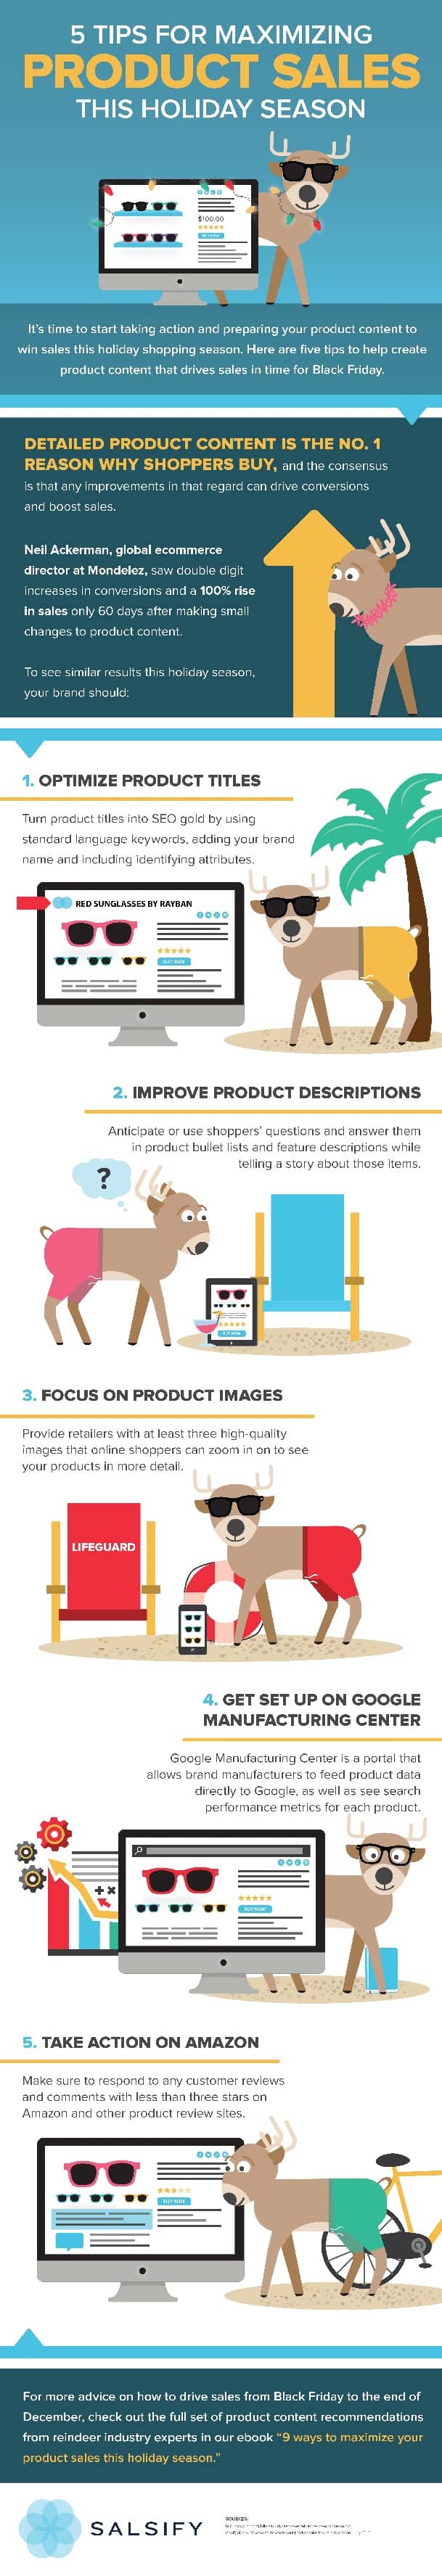 5 Tips To Maximize Your Product Sales This Holiday Season